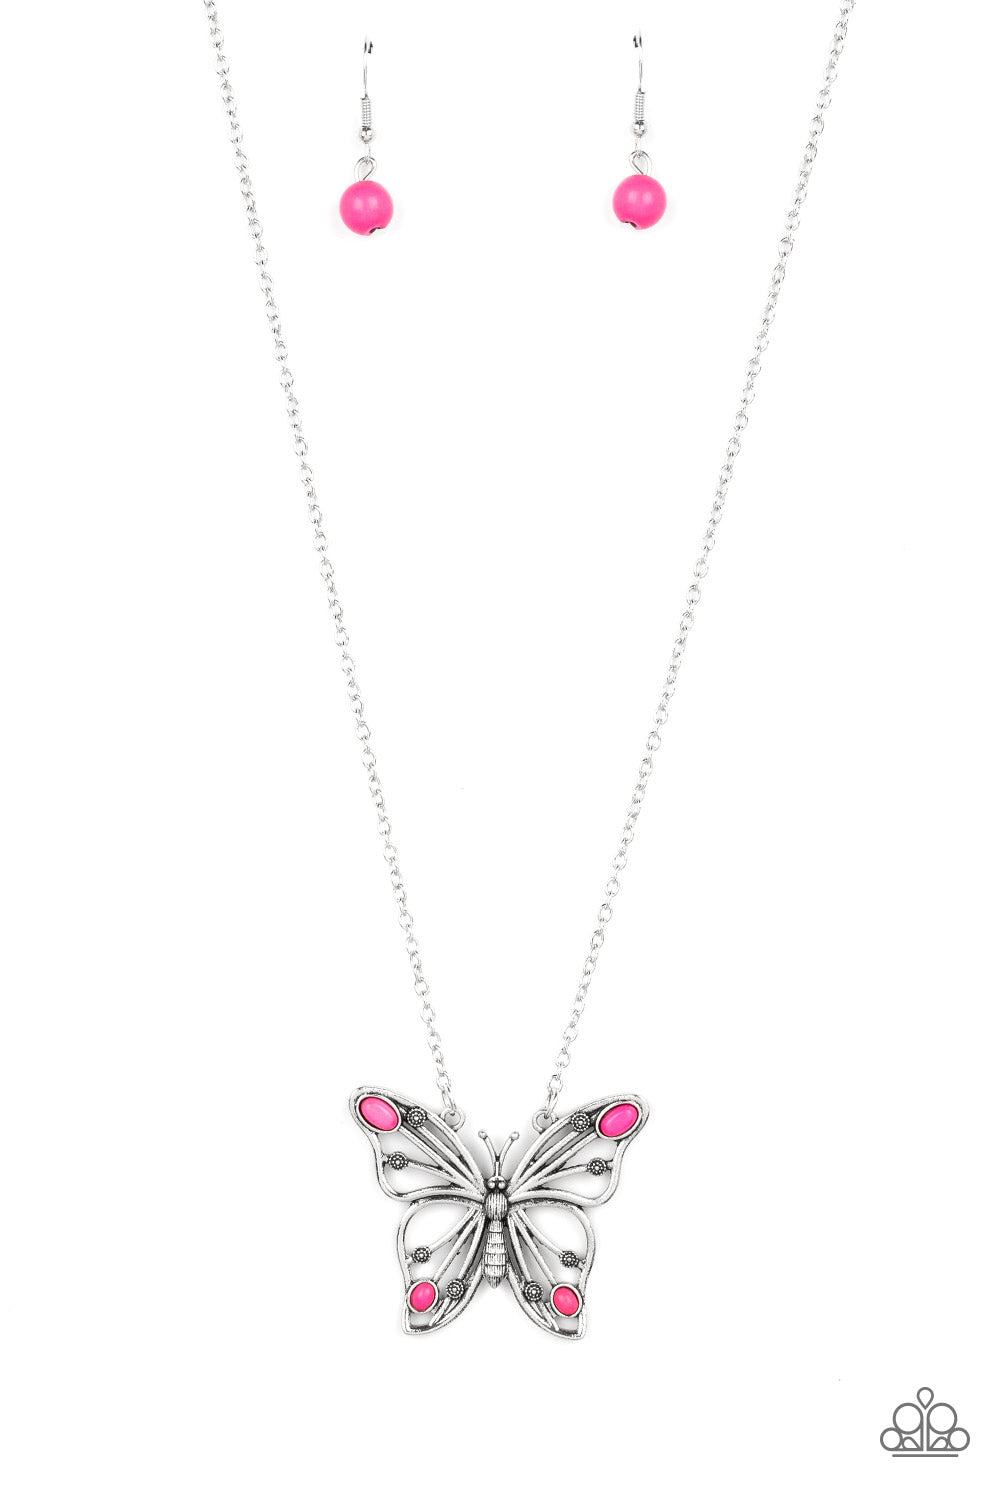 Badlands Butterfly - Pink necklace B009